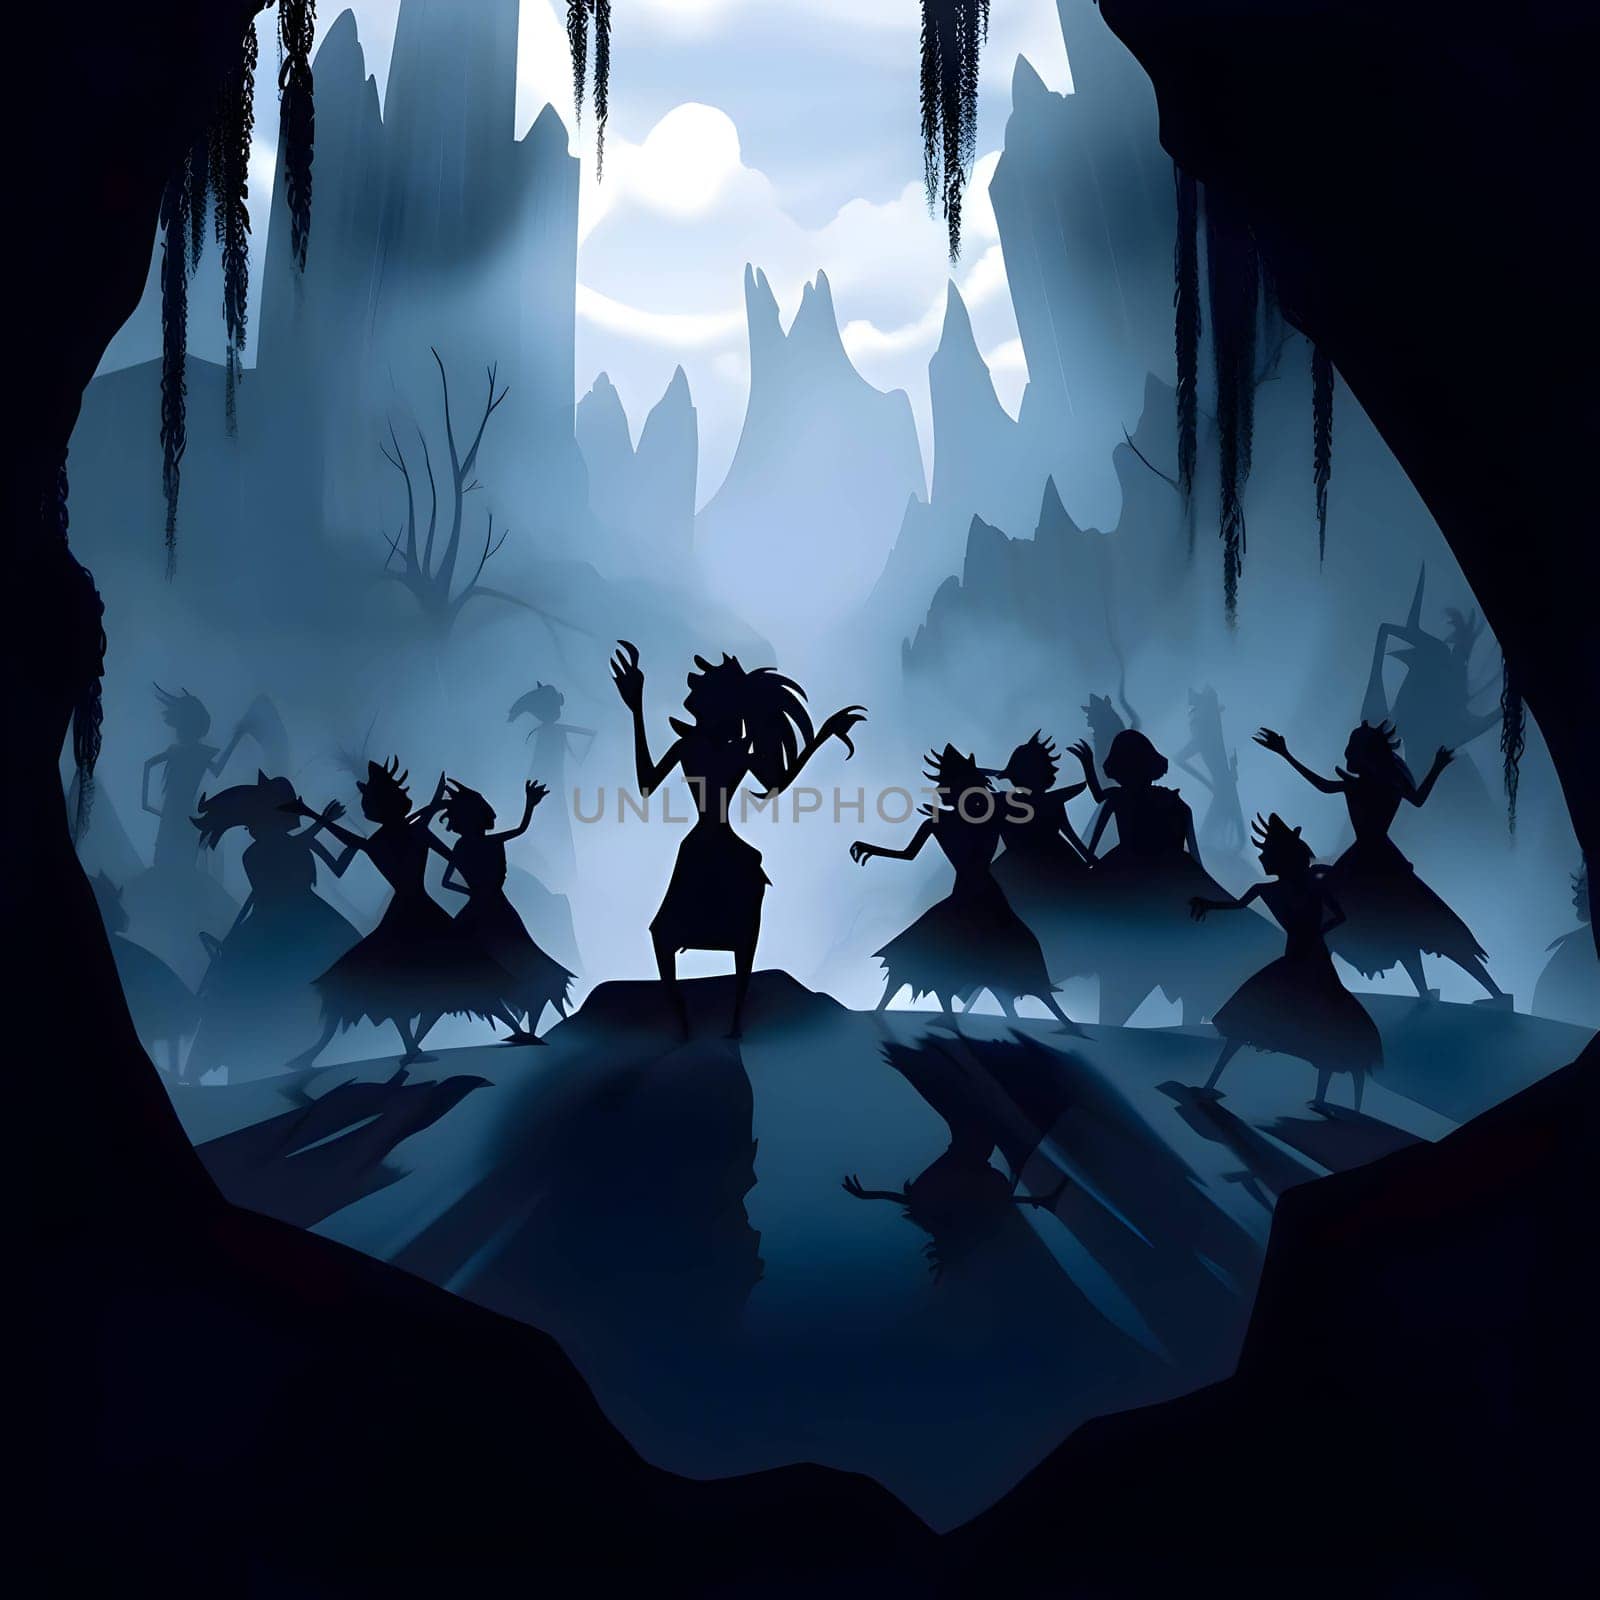 Vector illustration of shamans in black silhouette against a clean dark background, capturing graceful forms.